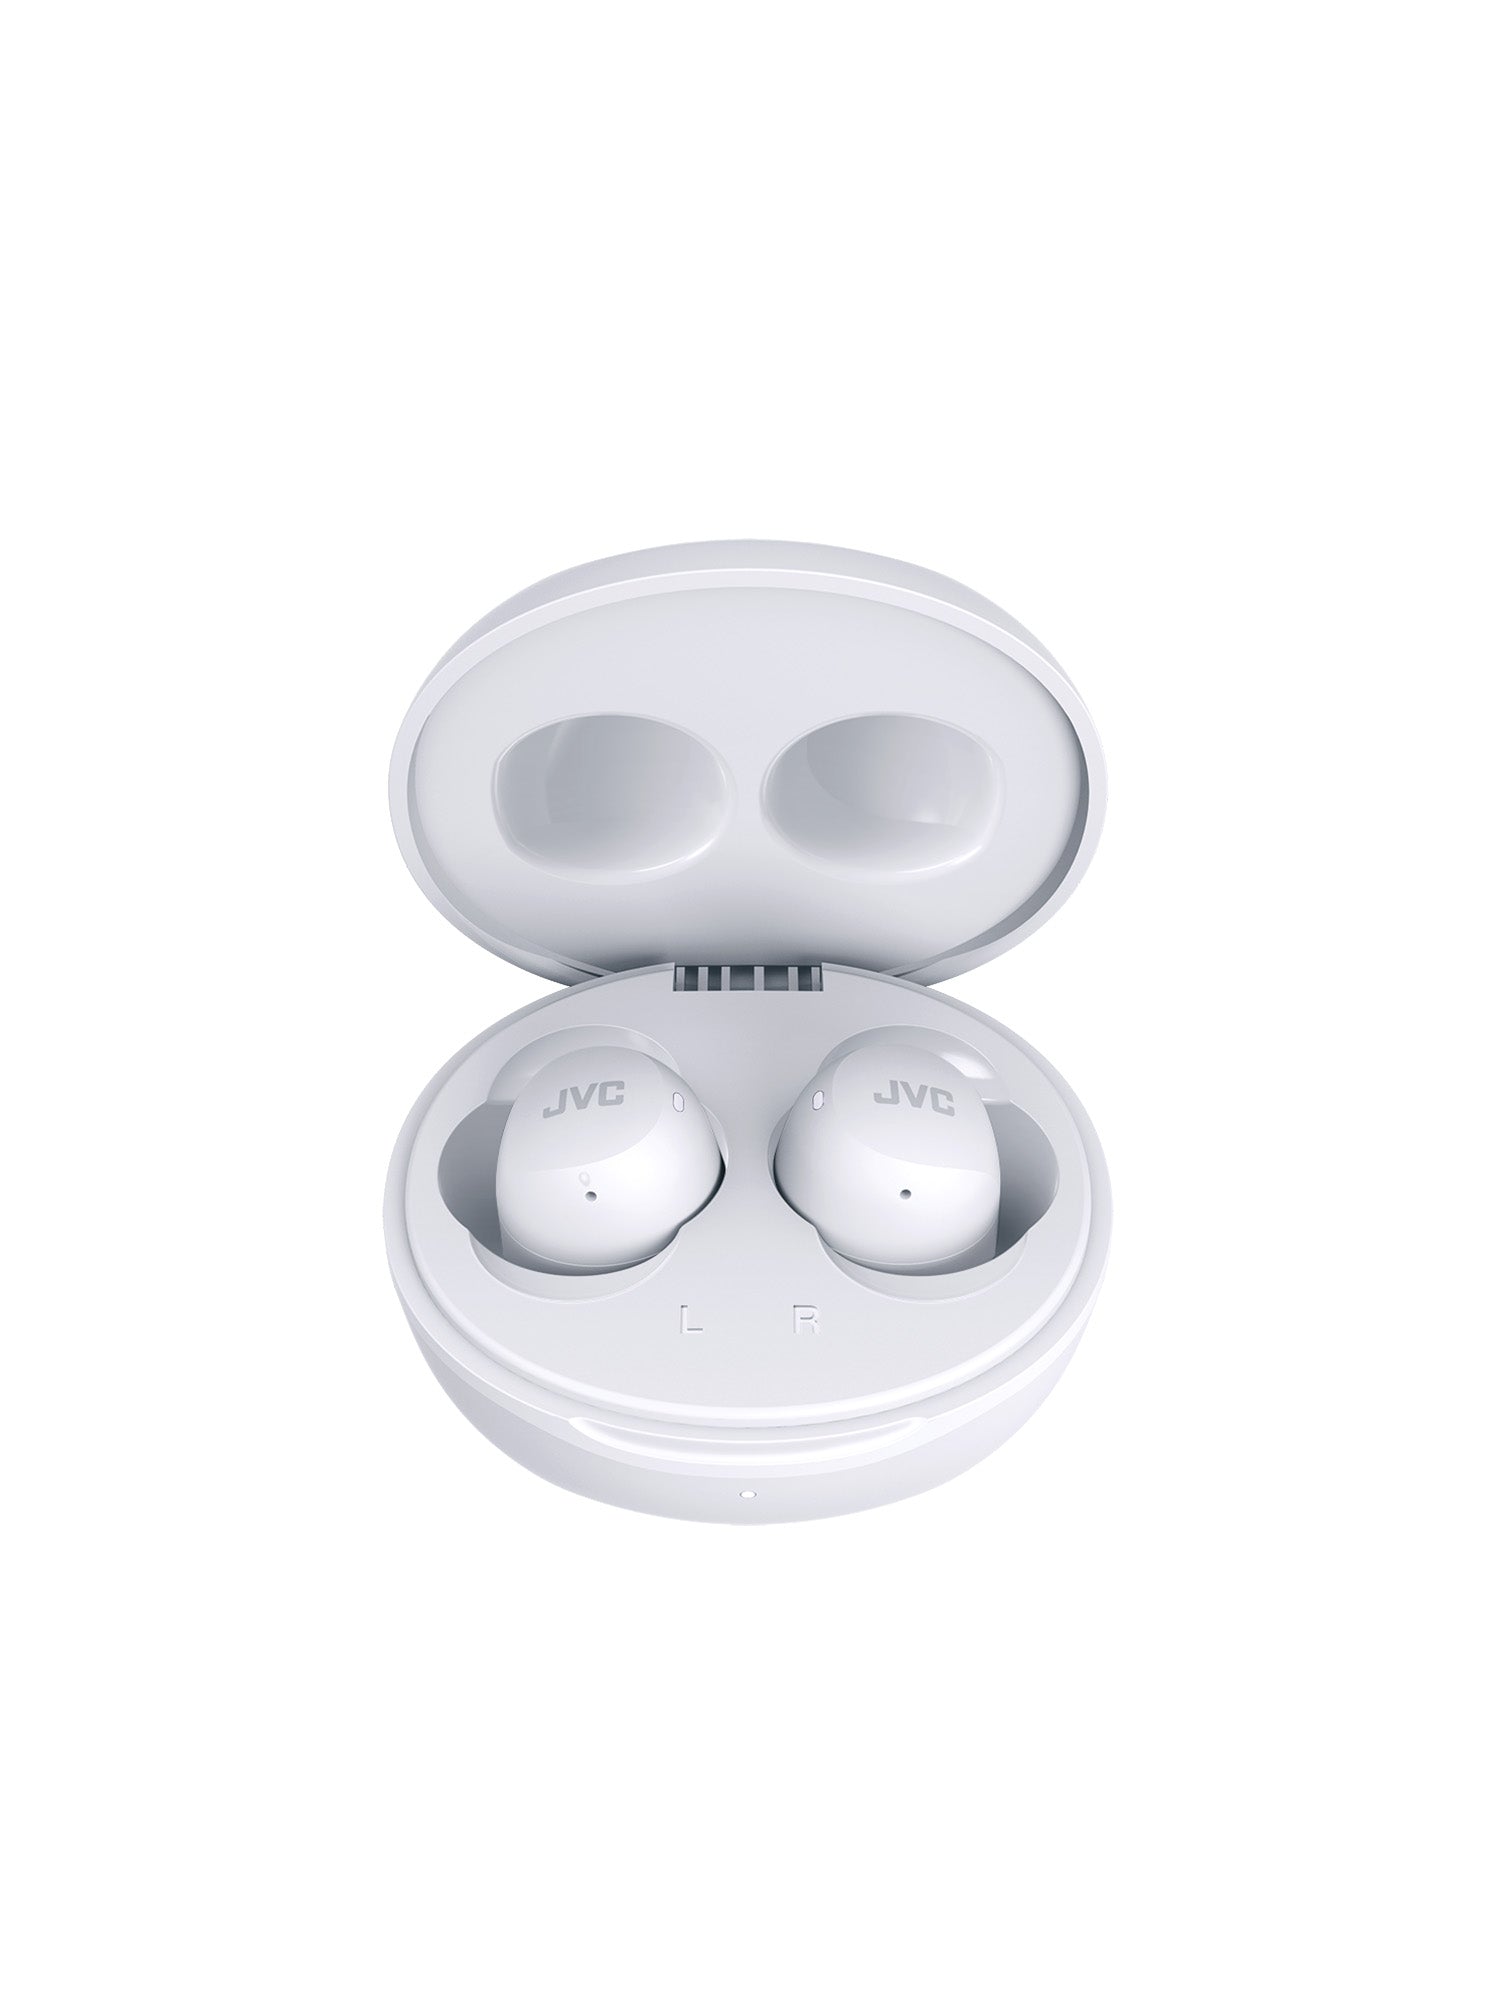 HA-A6T-W in white charging case by JVC